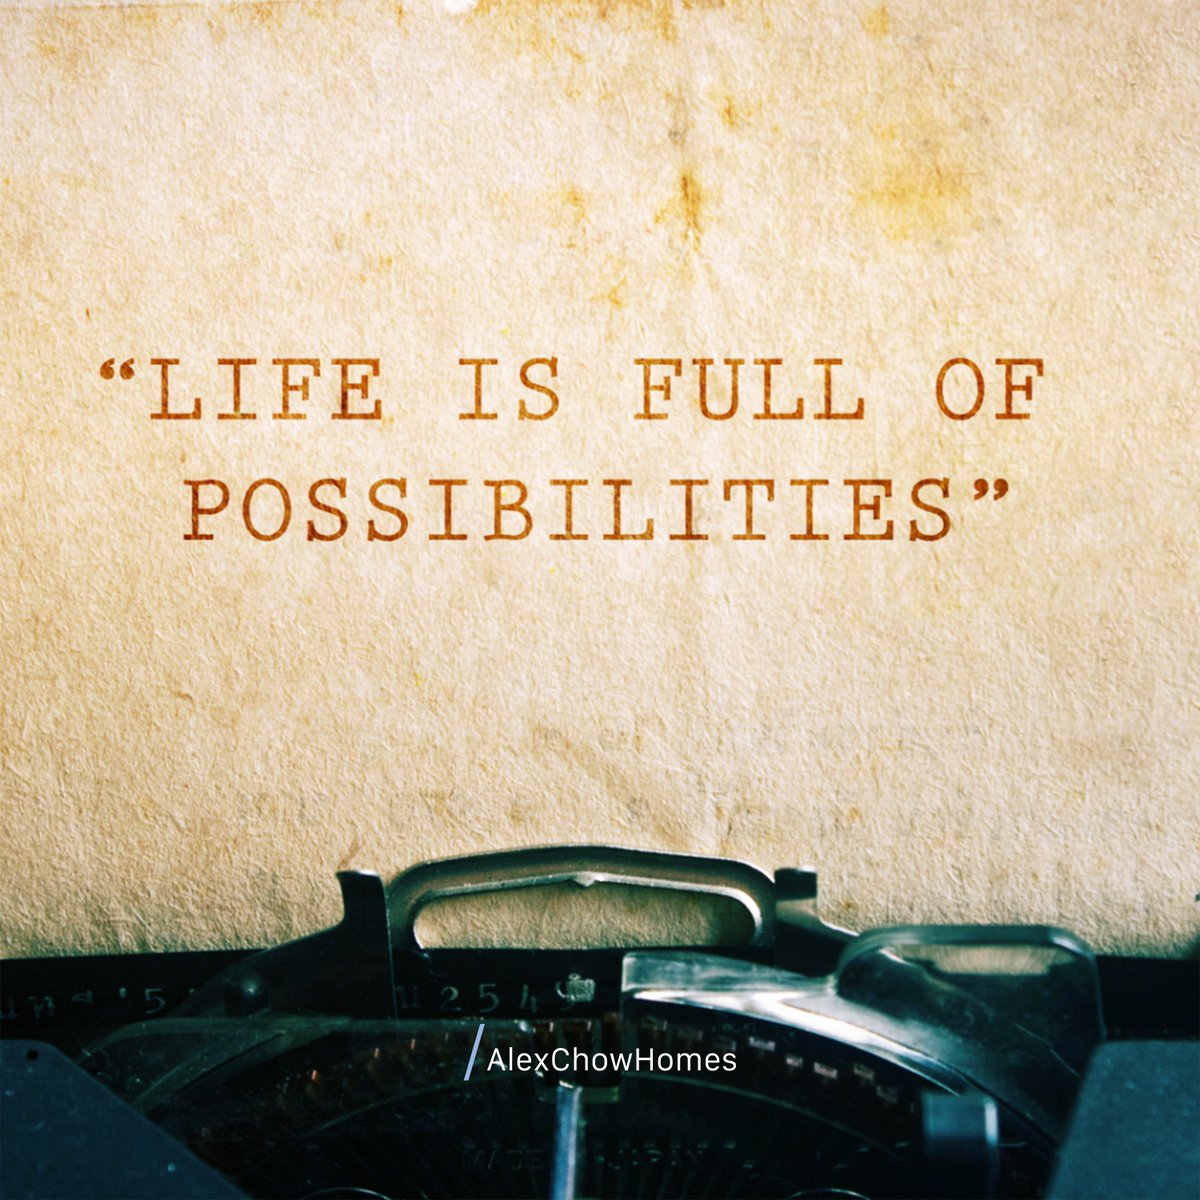 #MotivationMonday 💪 

Life is full of possibilities 🧑‍💻

💬 #quote #motivation #inspiration #RealEstateQuotes #RealEstateQuote #RealtorQuotes 

.

#Realtor #RealEstate #SanJose #SanJoseRealtor #SanJoseRealEstate #SiliconValley #SiliconValleyRealtor #SiliconValleyRealEstate